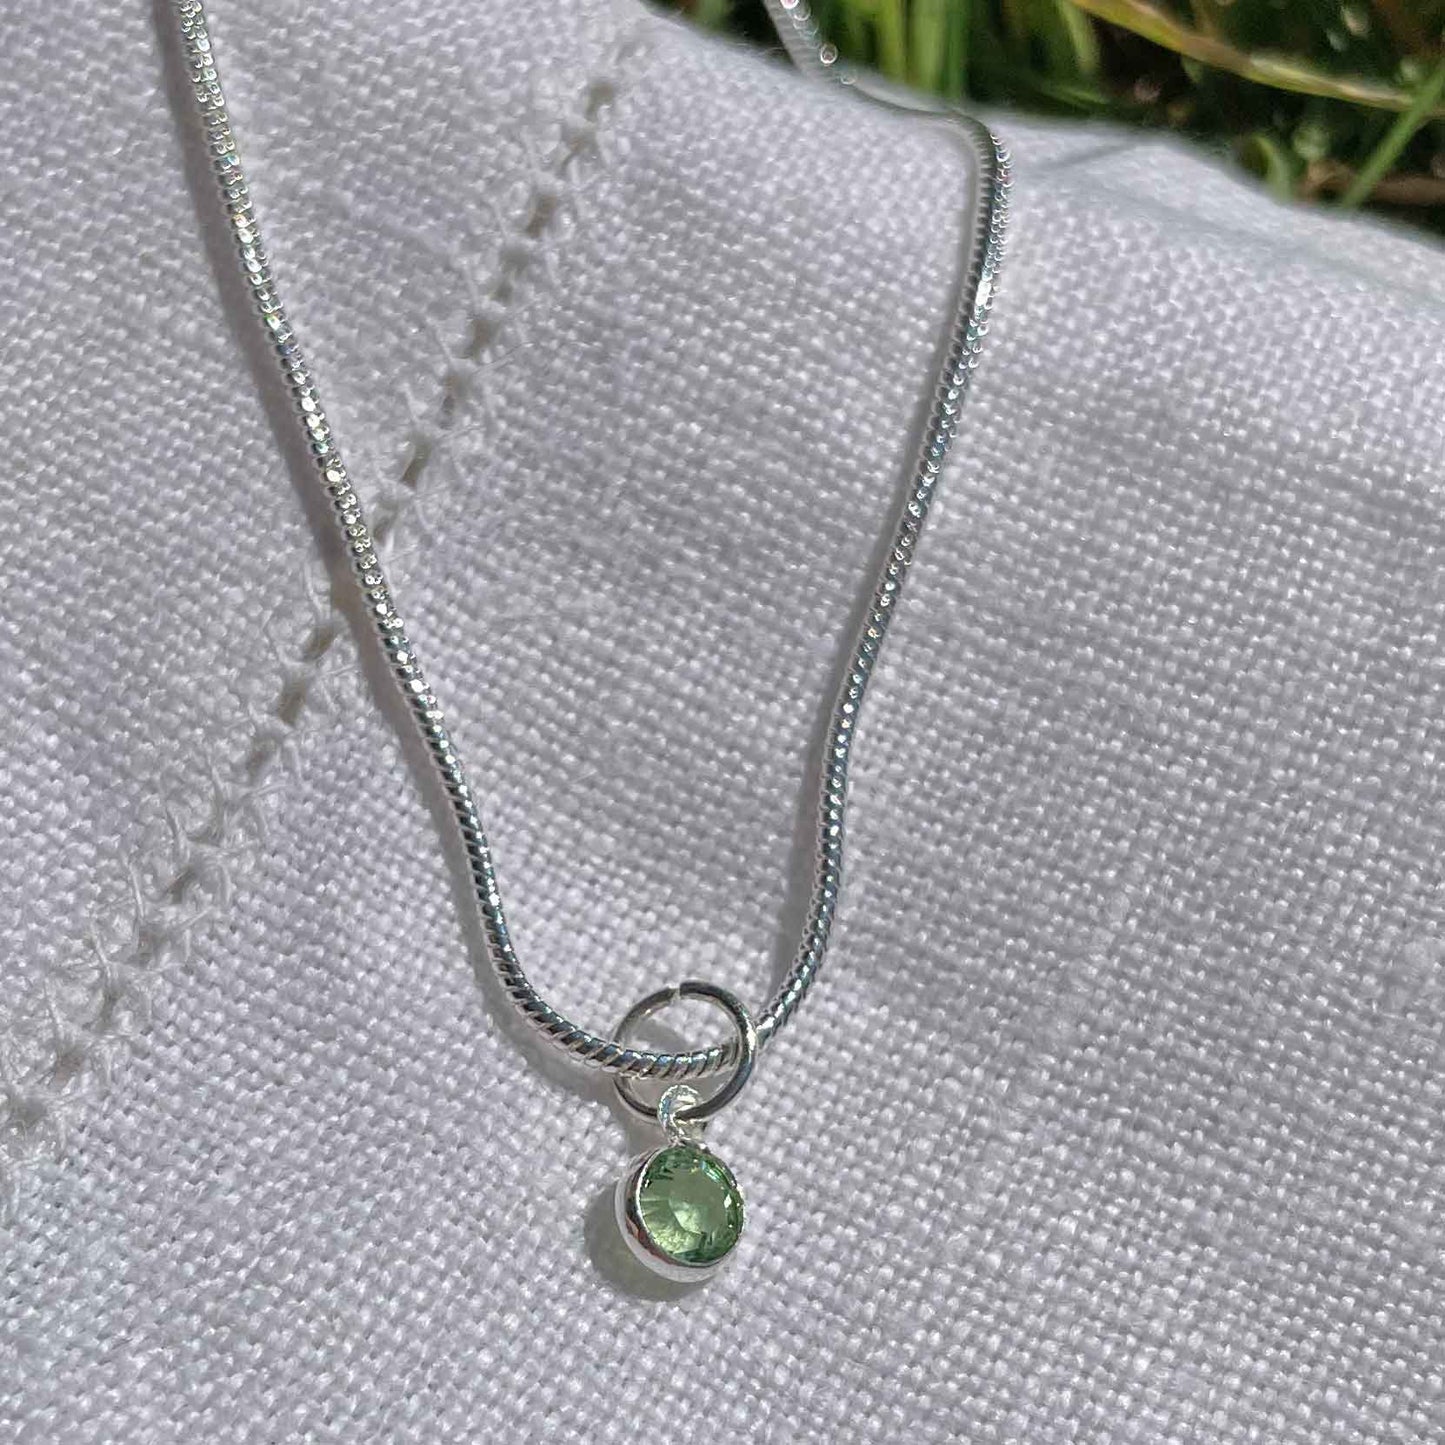 Birthstone Crystal Pendant - Silver Necklace - Welsh Language - August / Peridot